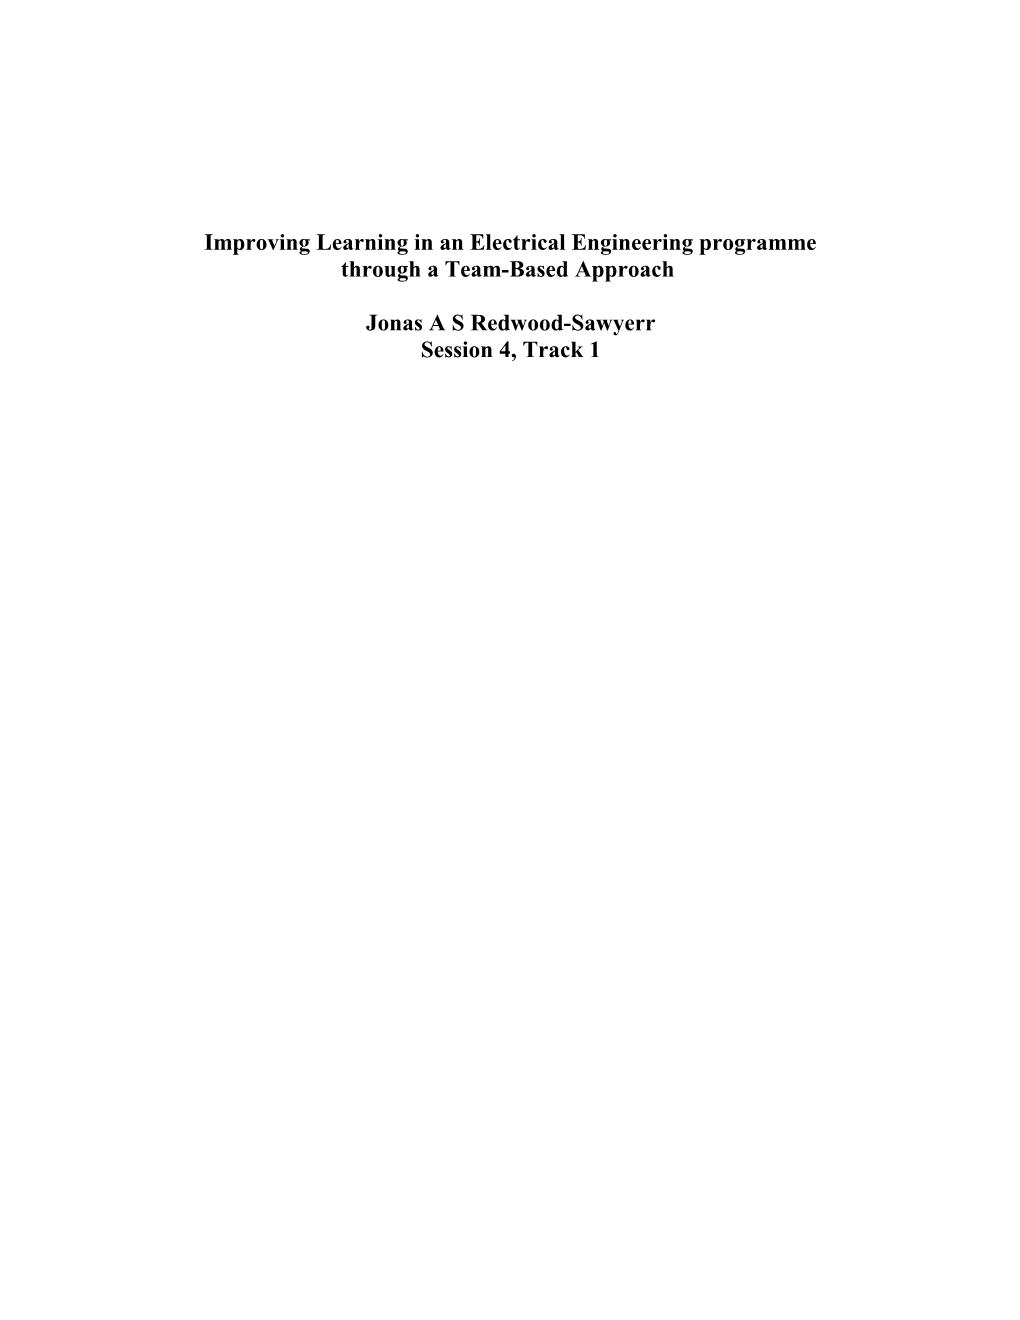 Improving Learning in an Electrical Engineering Programme Through a Team-Based Approach